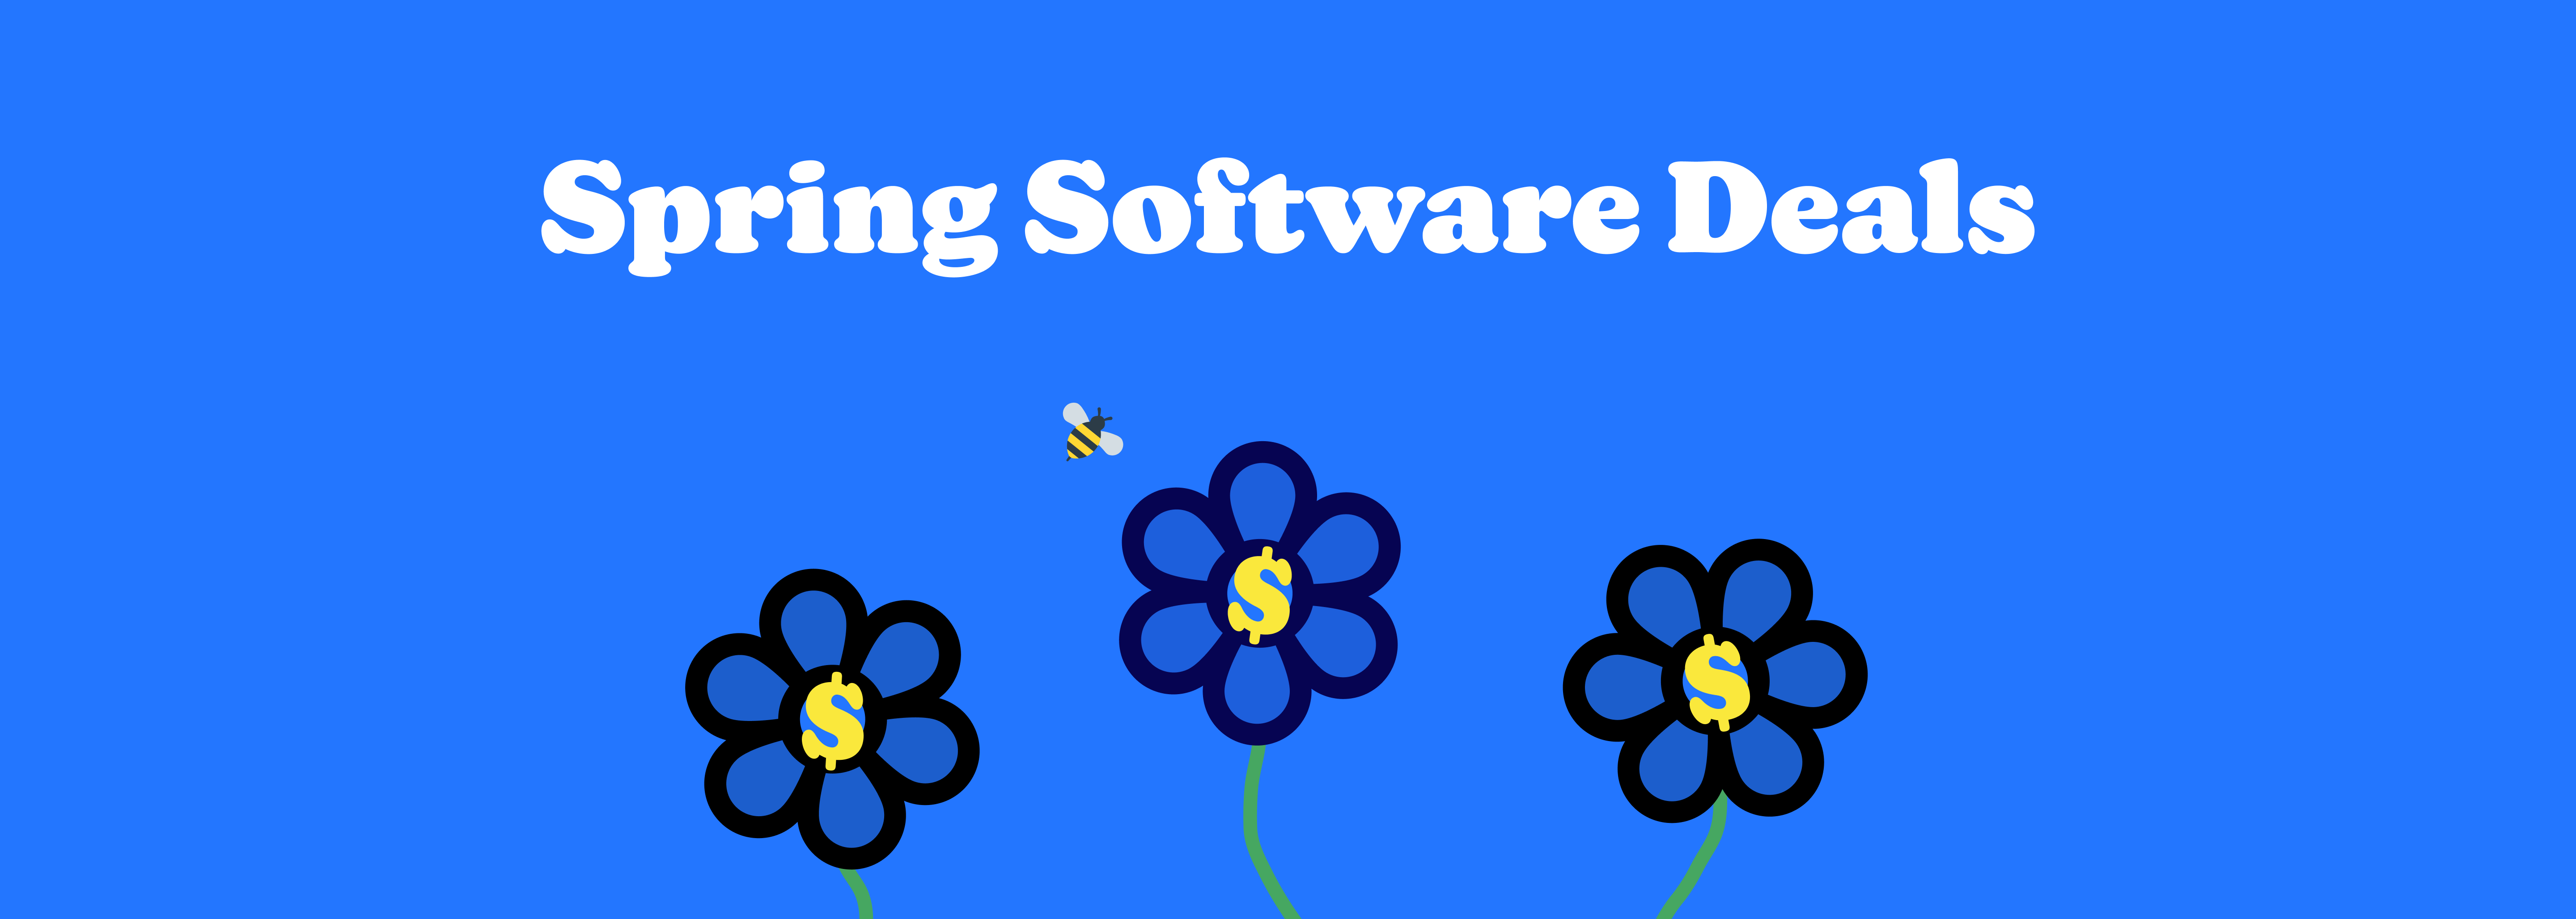 Help your business spring forward with these savings